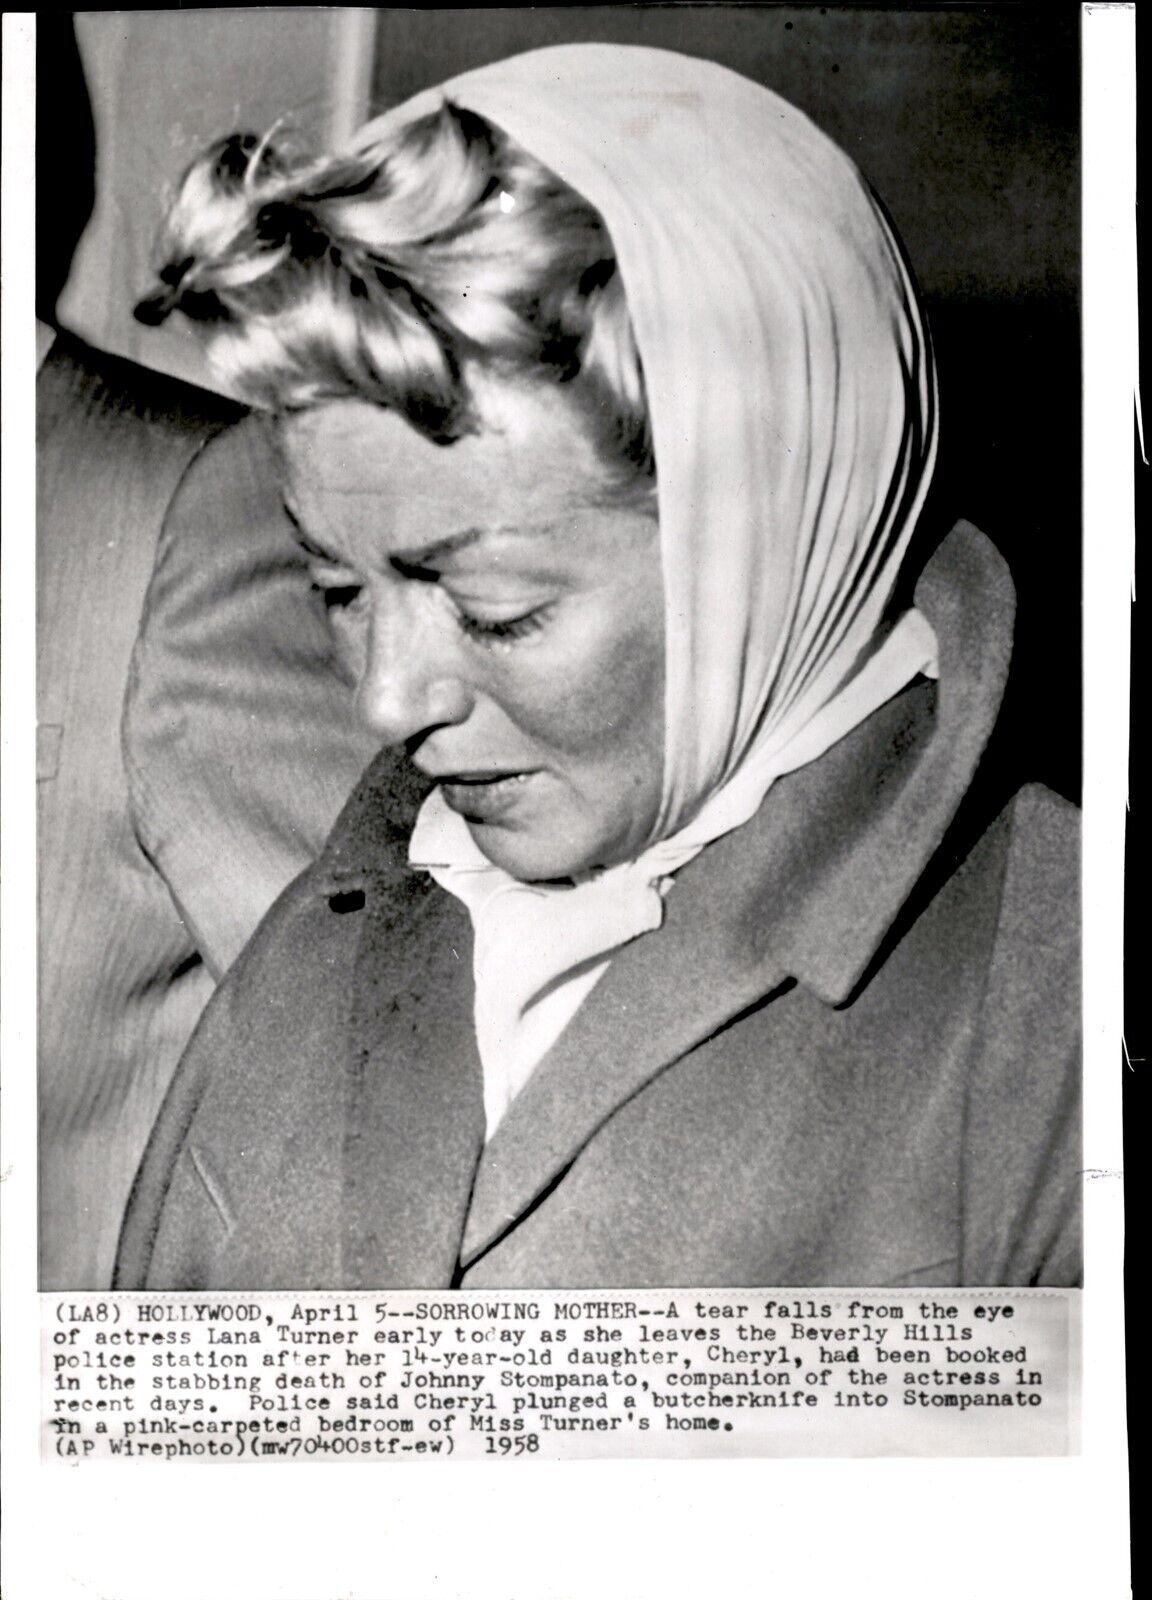 LG45 1958 Wire Photo SORROWING MOTHER CRYING ACTRESS LANA TURNER DAUGHTER ARREST